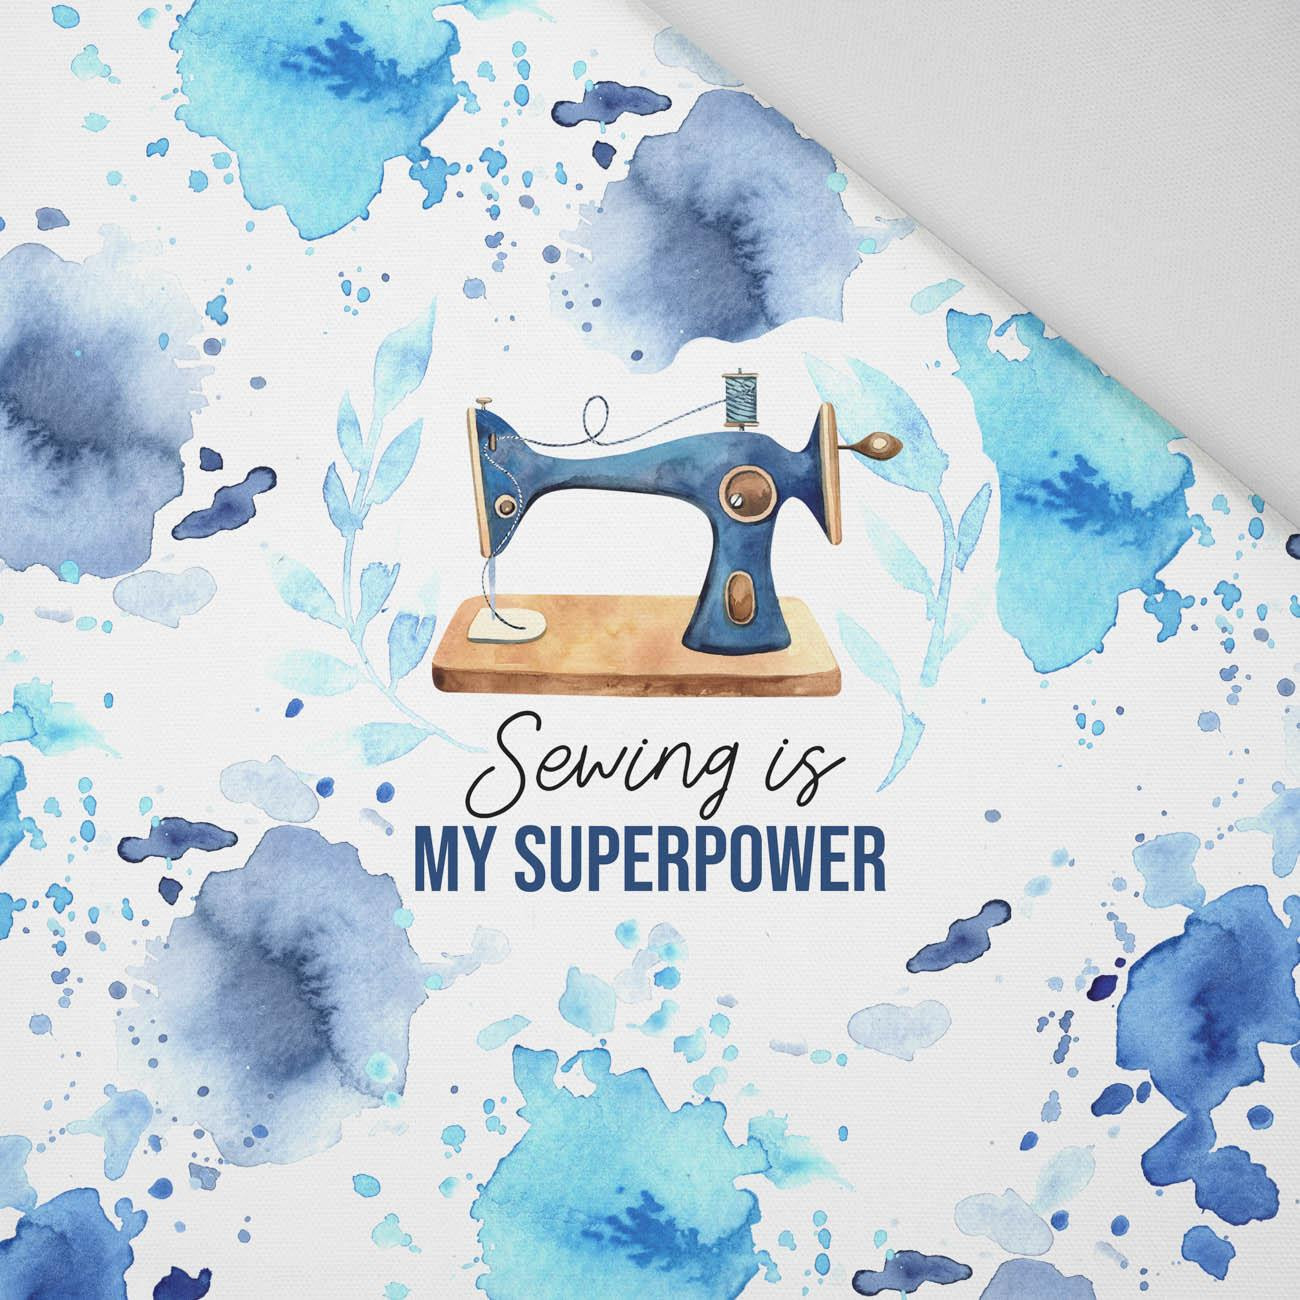 SEWING IS MY SUPERPOWER - panel (75cm x 80cm) Panama 220g